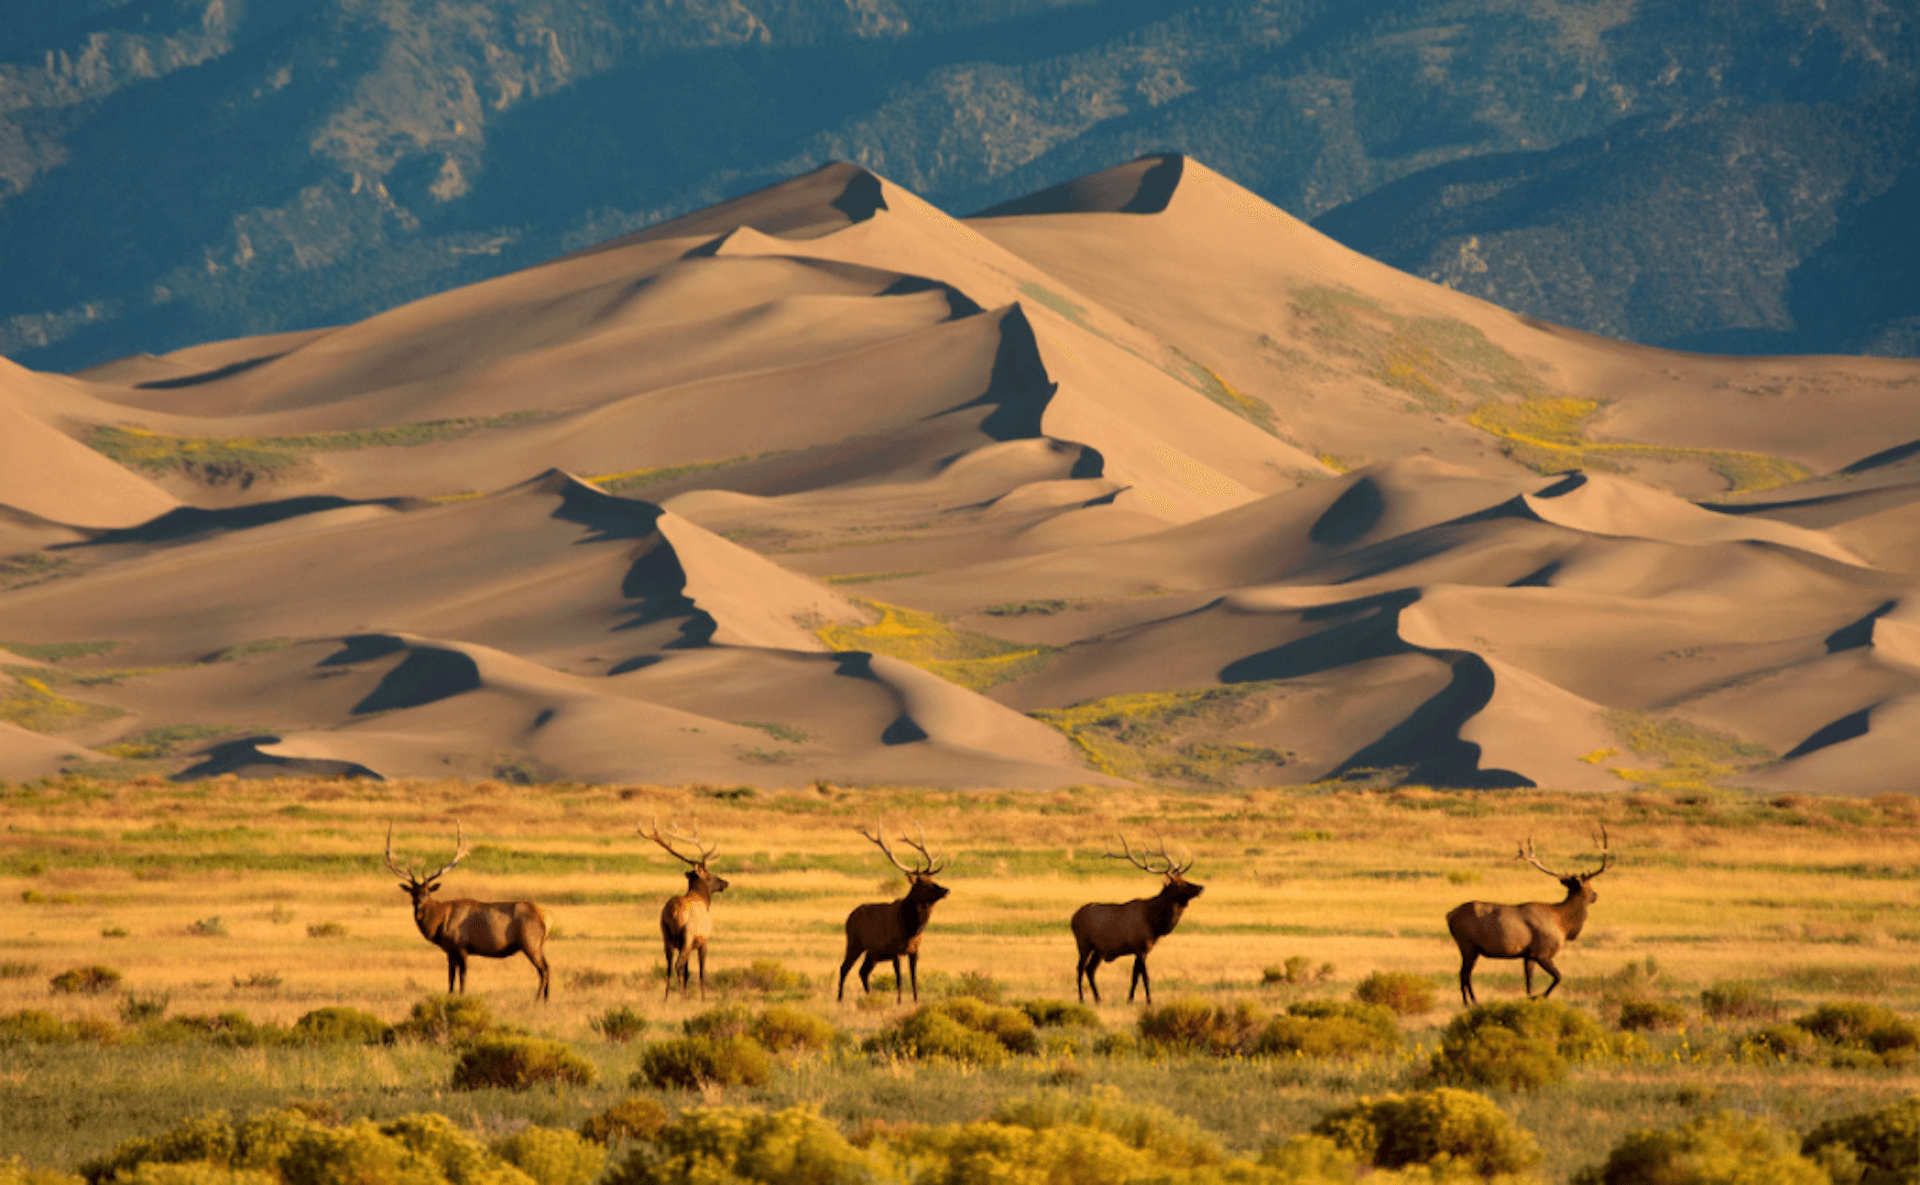 The Great Sand Dunes National Park in Colorado is a hidden travel gem for adventure travel in the USA. It's home to the tallest sand dunes in North America and offers hiking, sandboarding, and camping opportunities